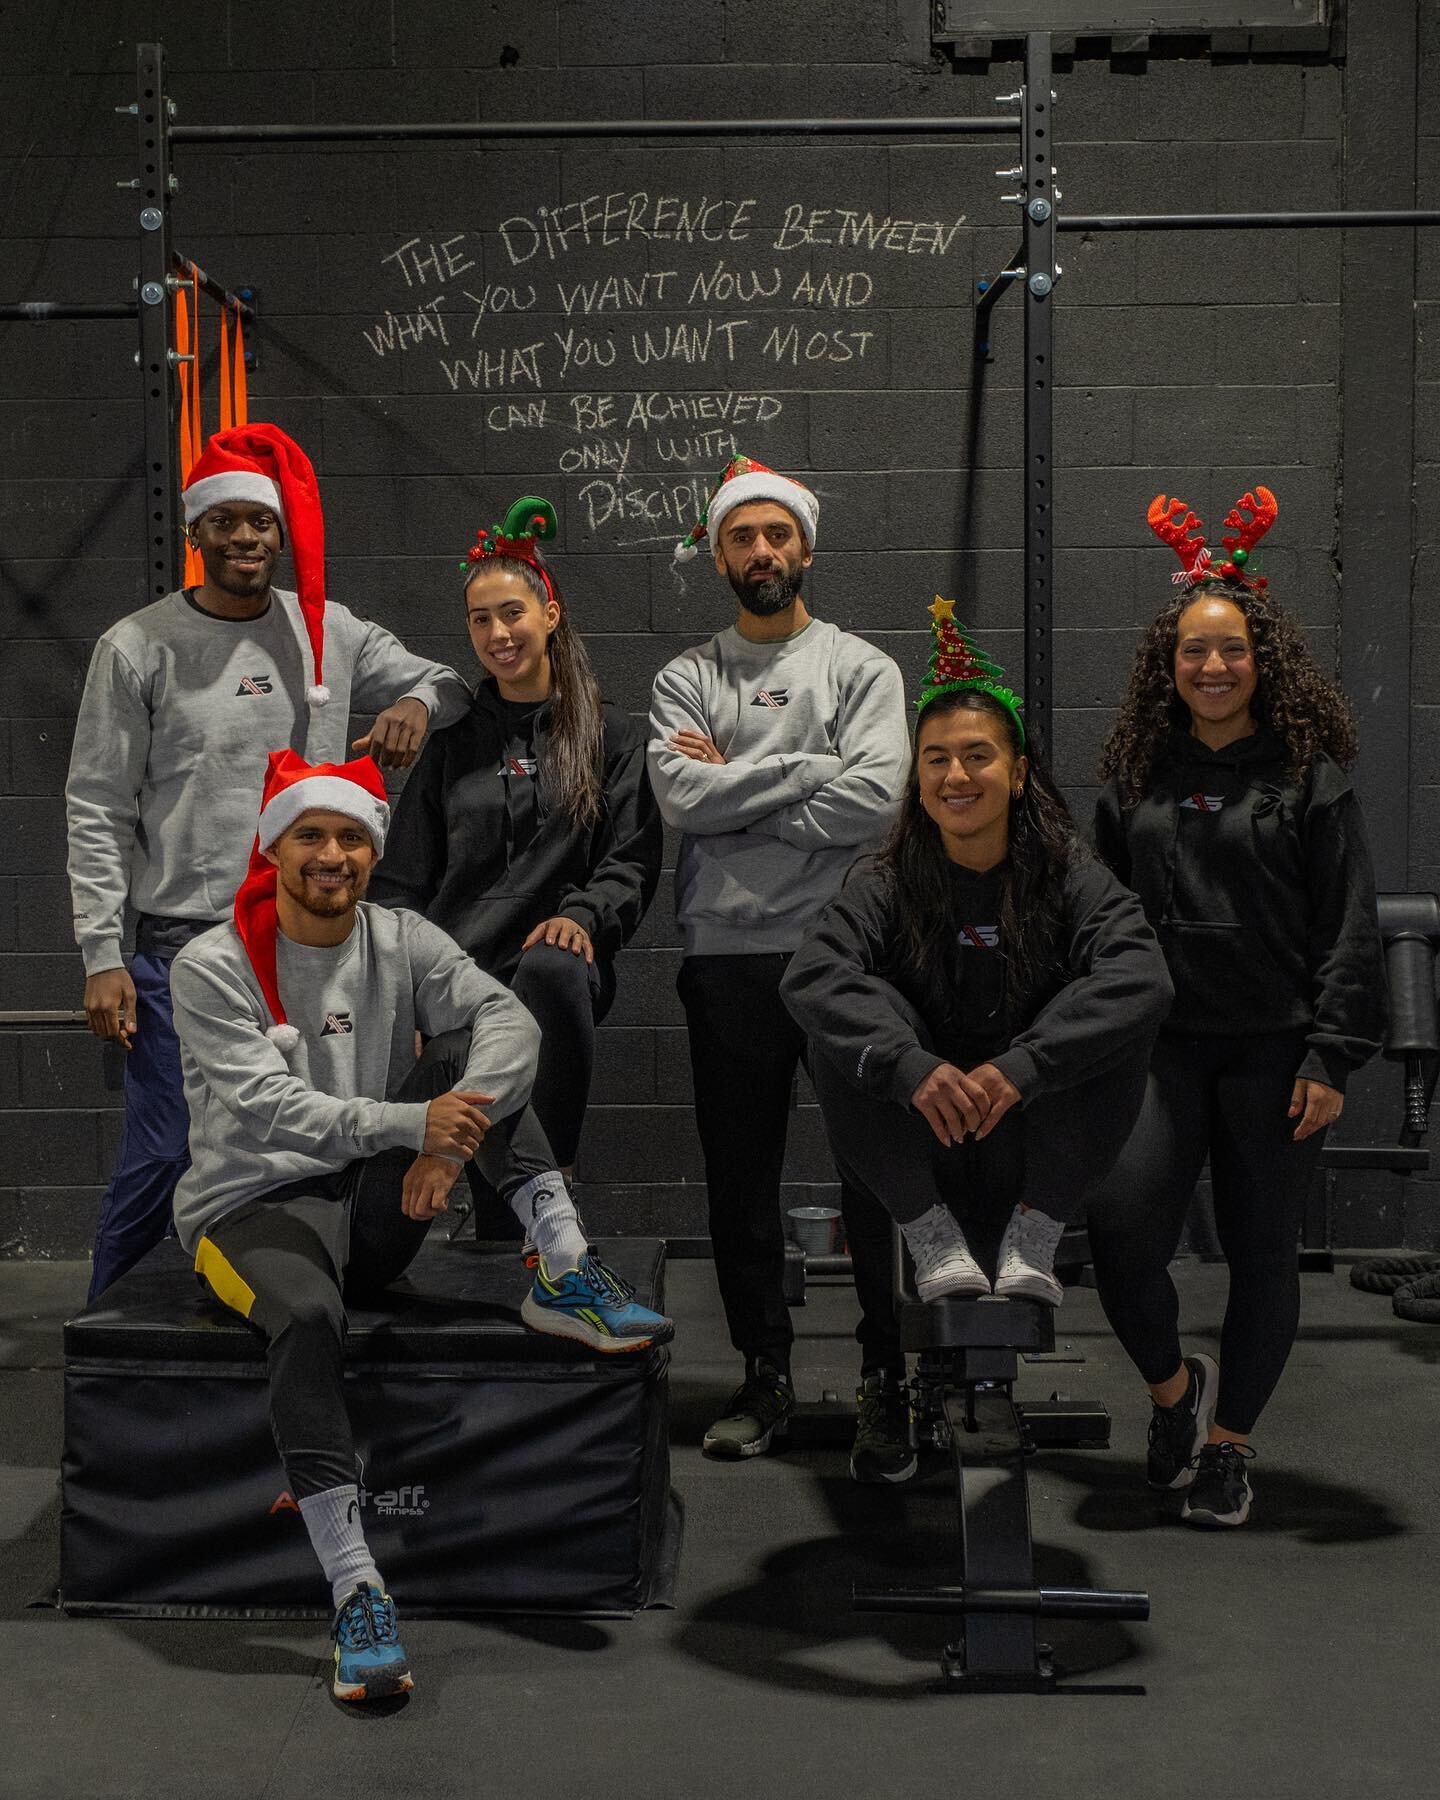 HAPPY CHRISTMAS 🎁🎄
Our team @as.one.nation is wishing you a merry Christmas‼️ 
Spend this period of the year with people you love and enjoy all the delicious food without guilt🤩
We will see you Tuesday for our first group class post holiday 💪🔥

